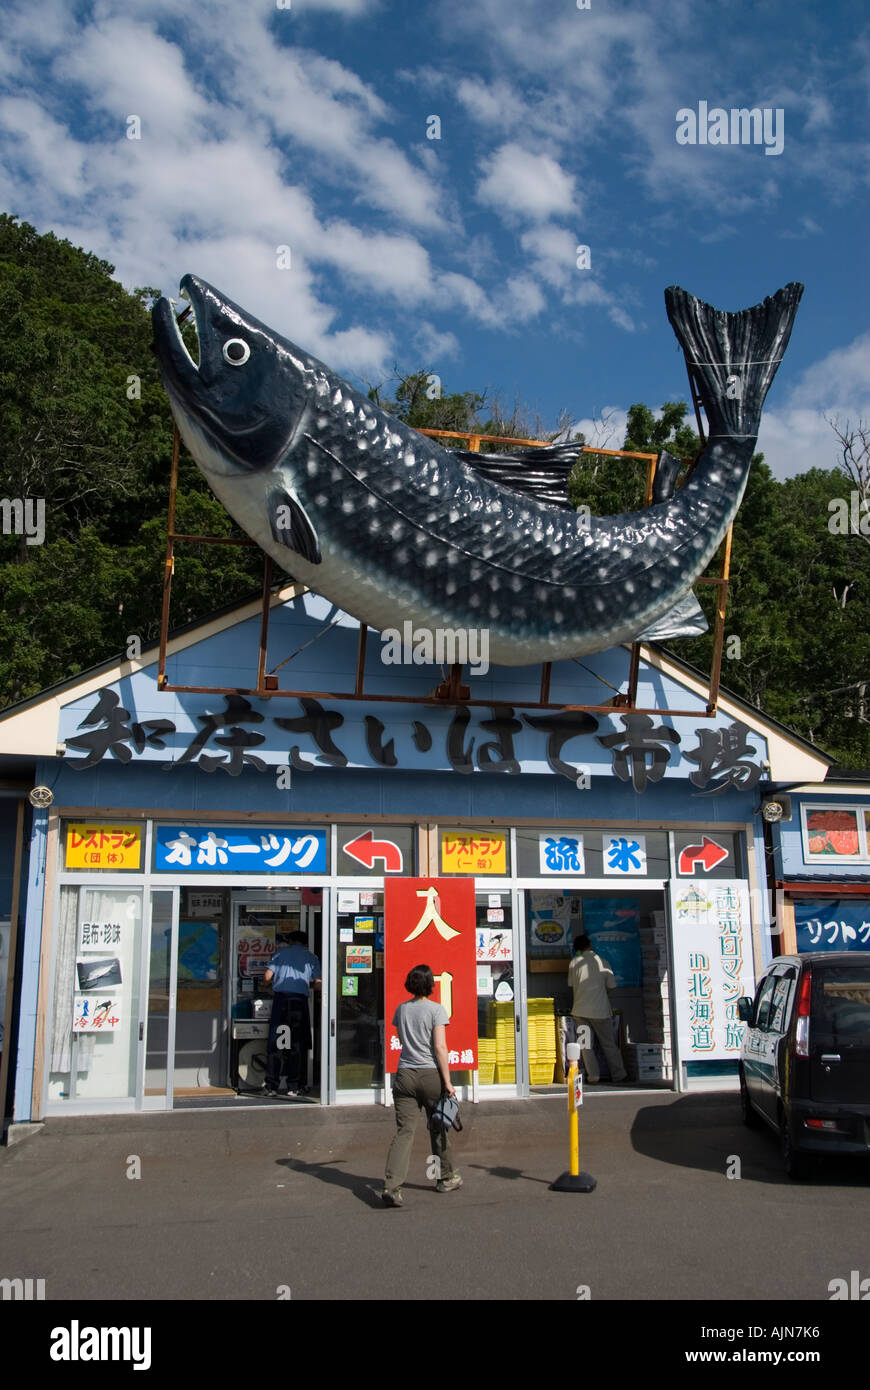 Large plastic fish on roof of grocery store in Hokkaido Japan